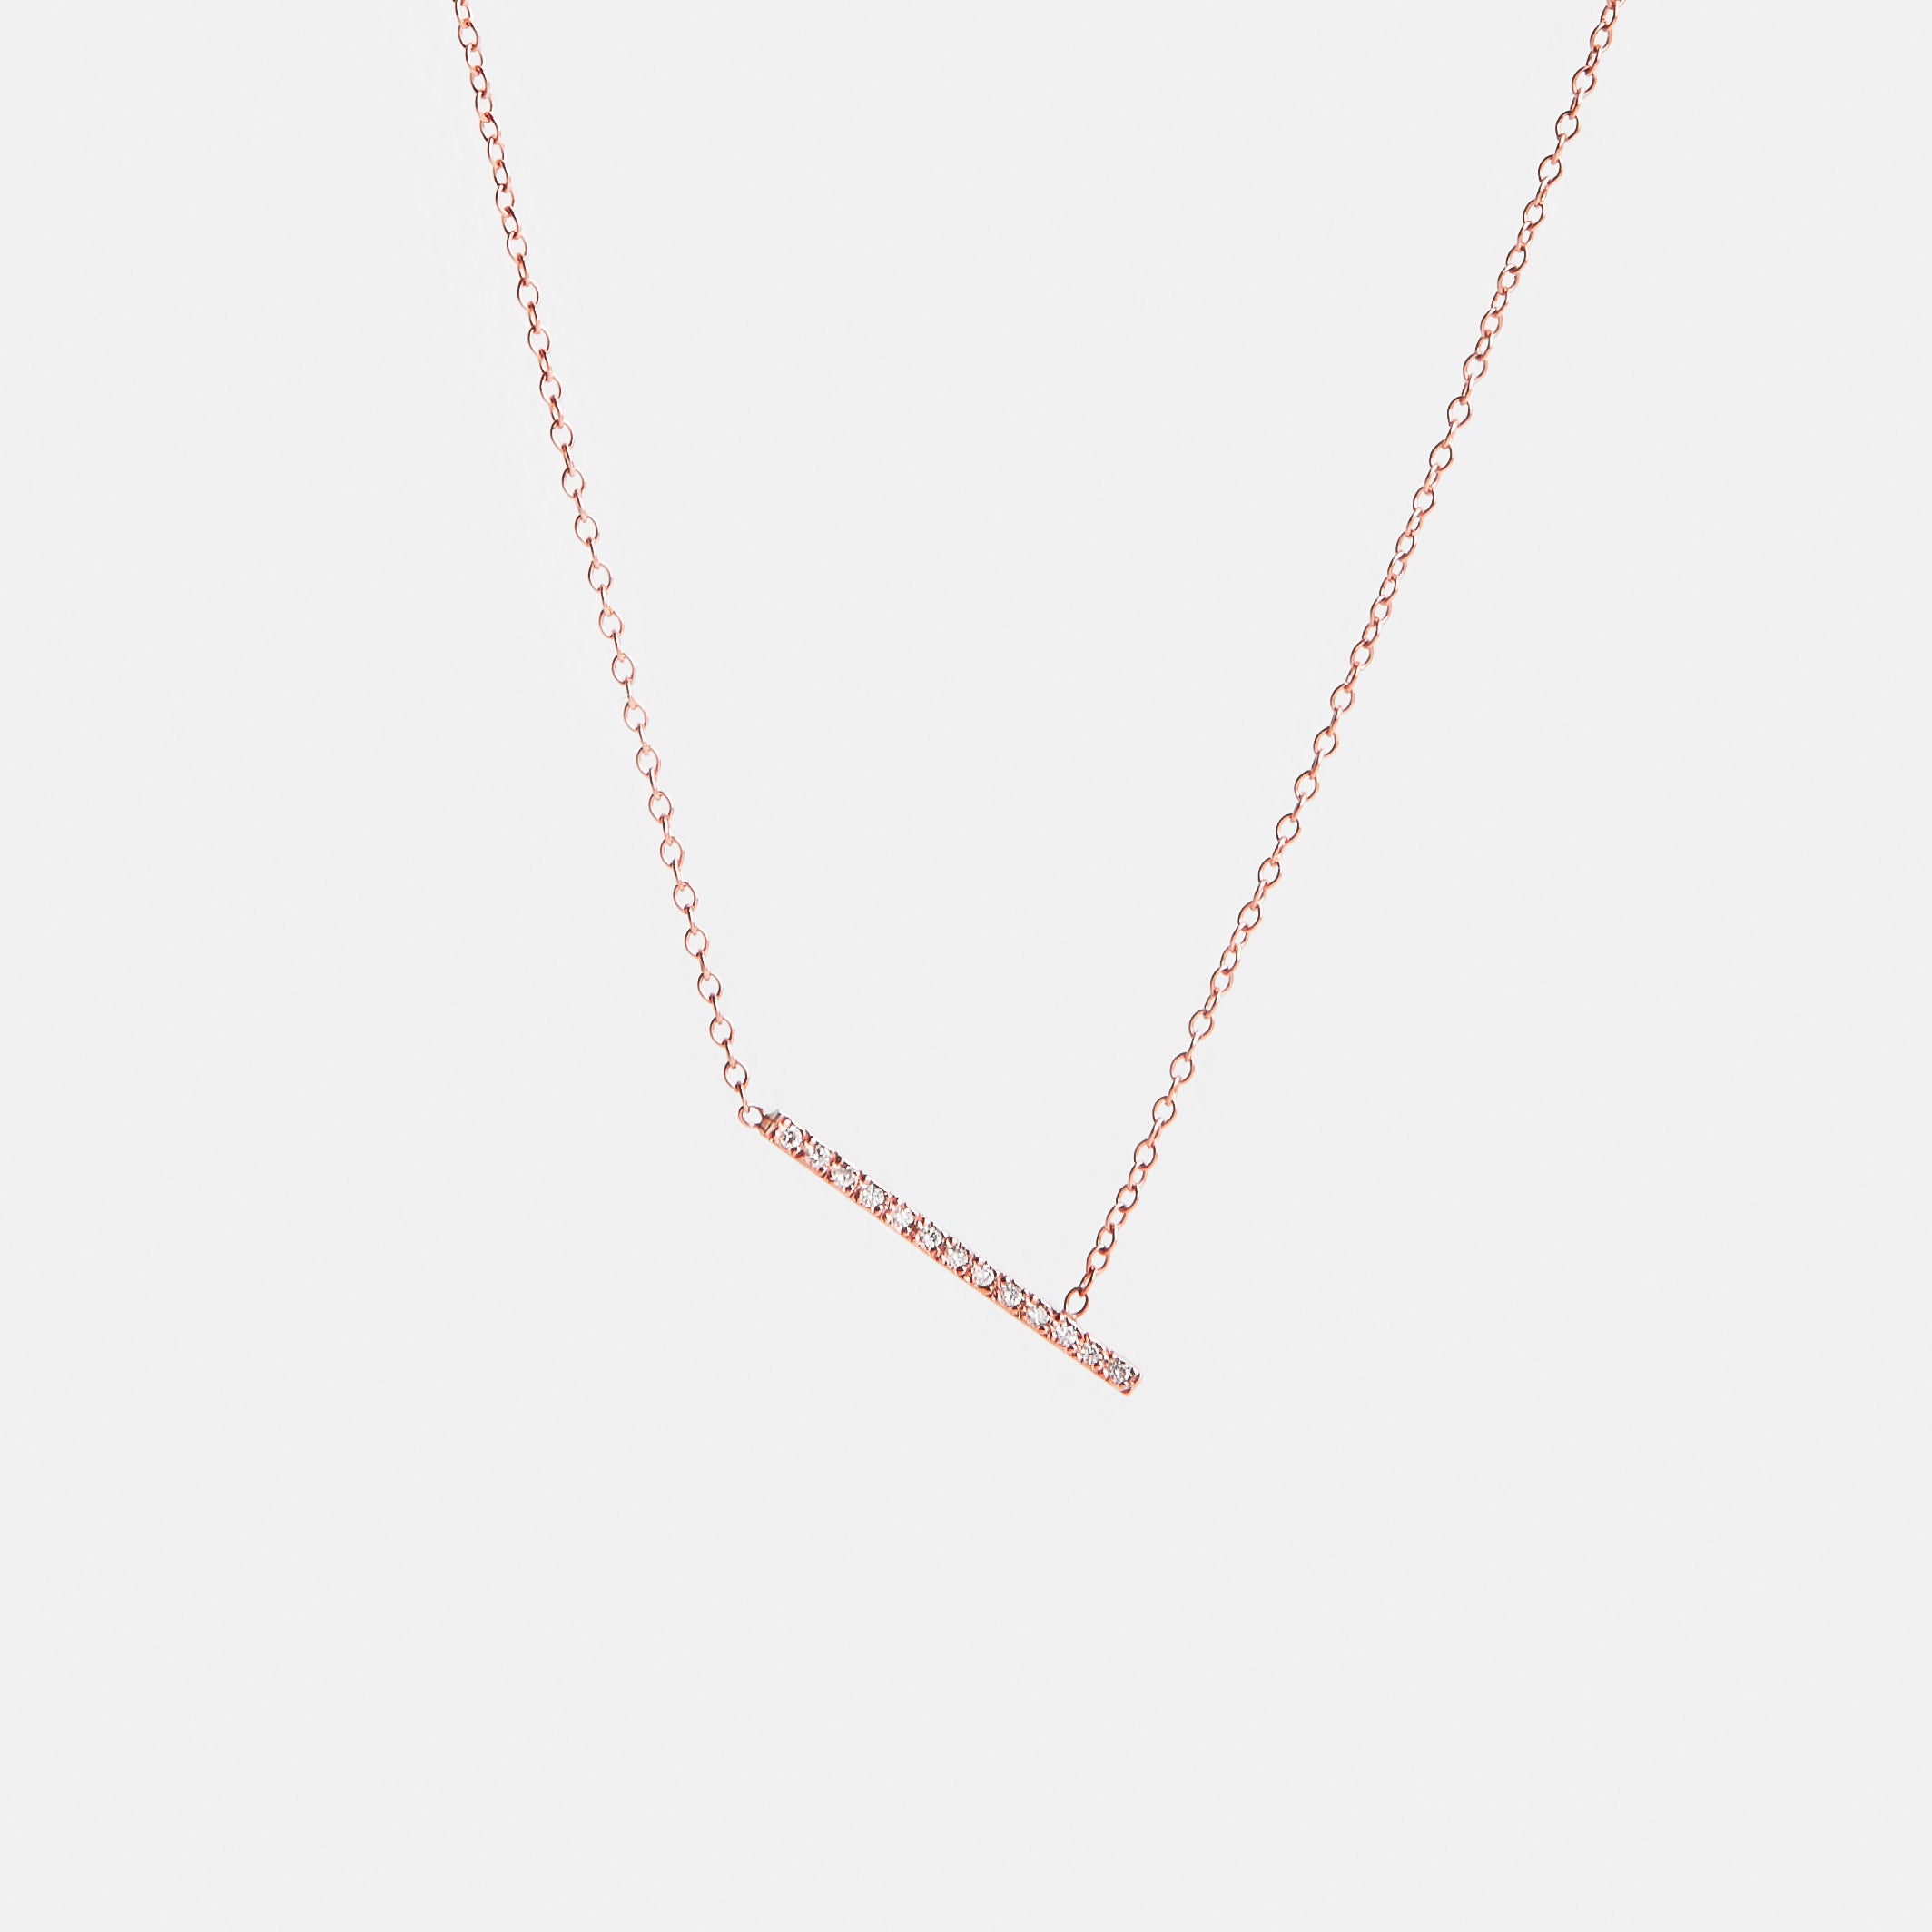 Tira Designer Necklace in 14k Rose Gold set with White Diamonds By SHW Fine Jewelry NYC